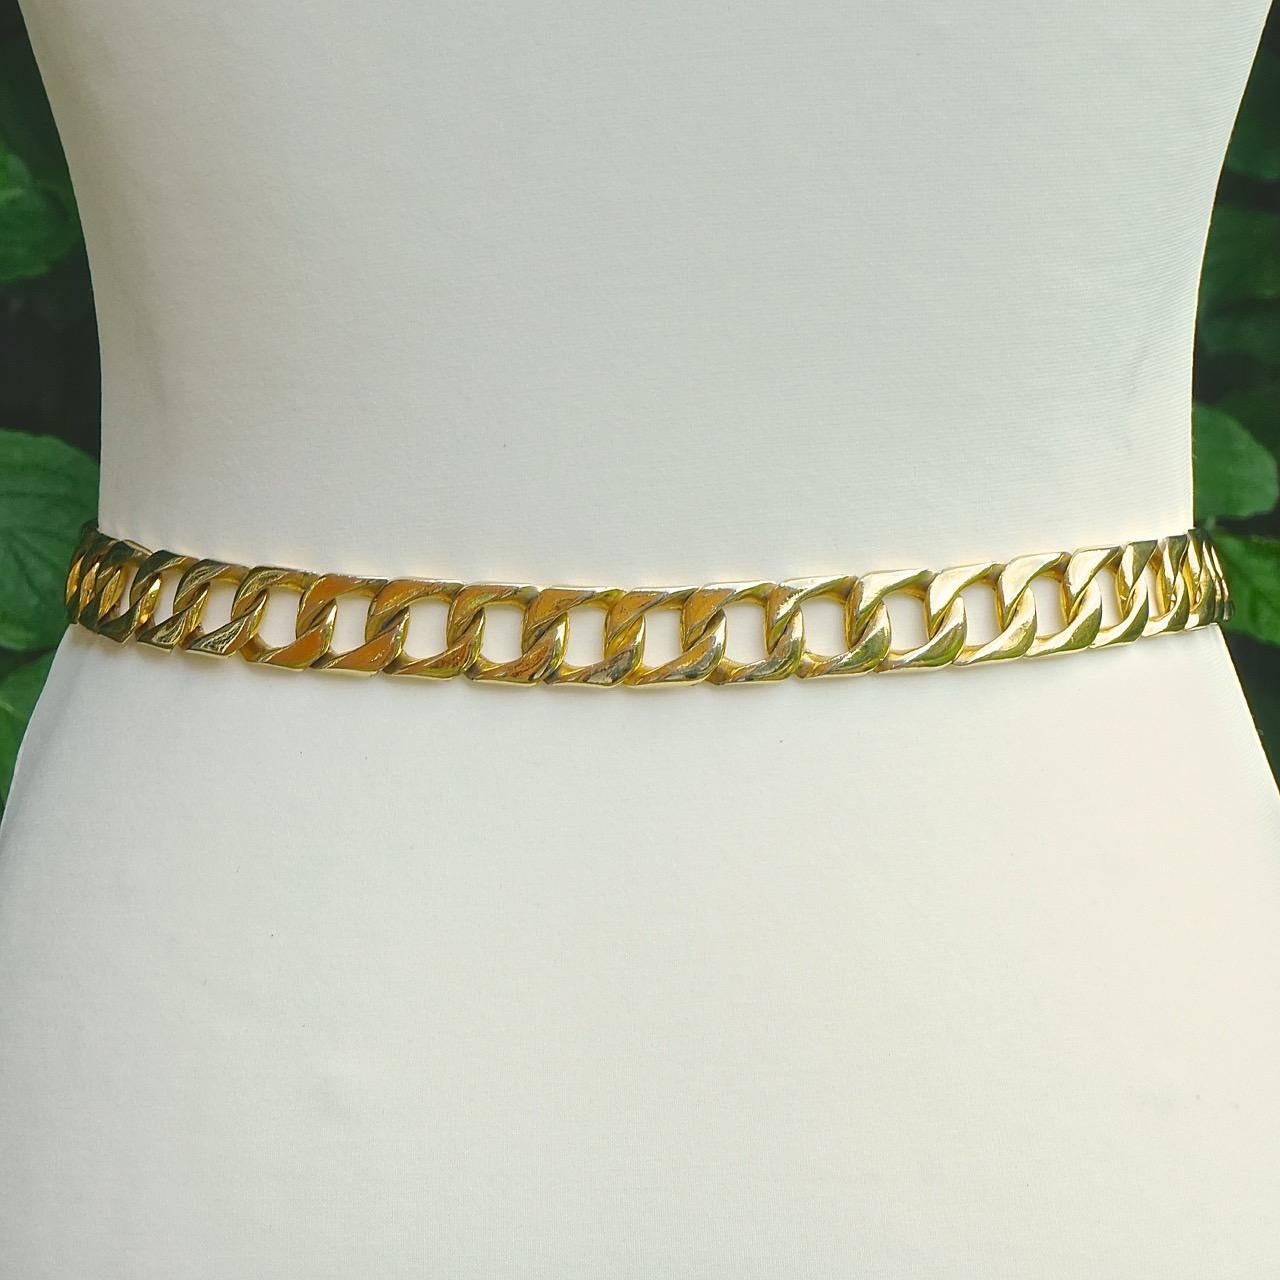 Women's or Men's Gold Plated Heavy Adjustable Curb Link Chain Buckle Belt circa 1980s